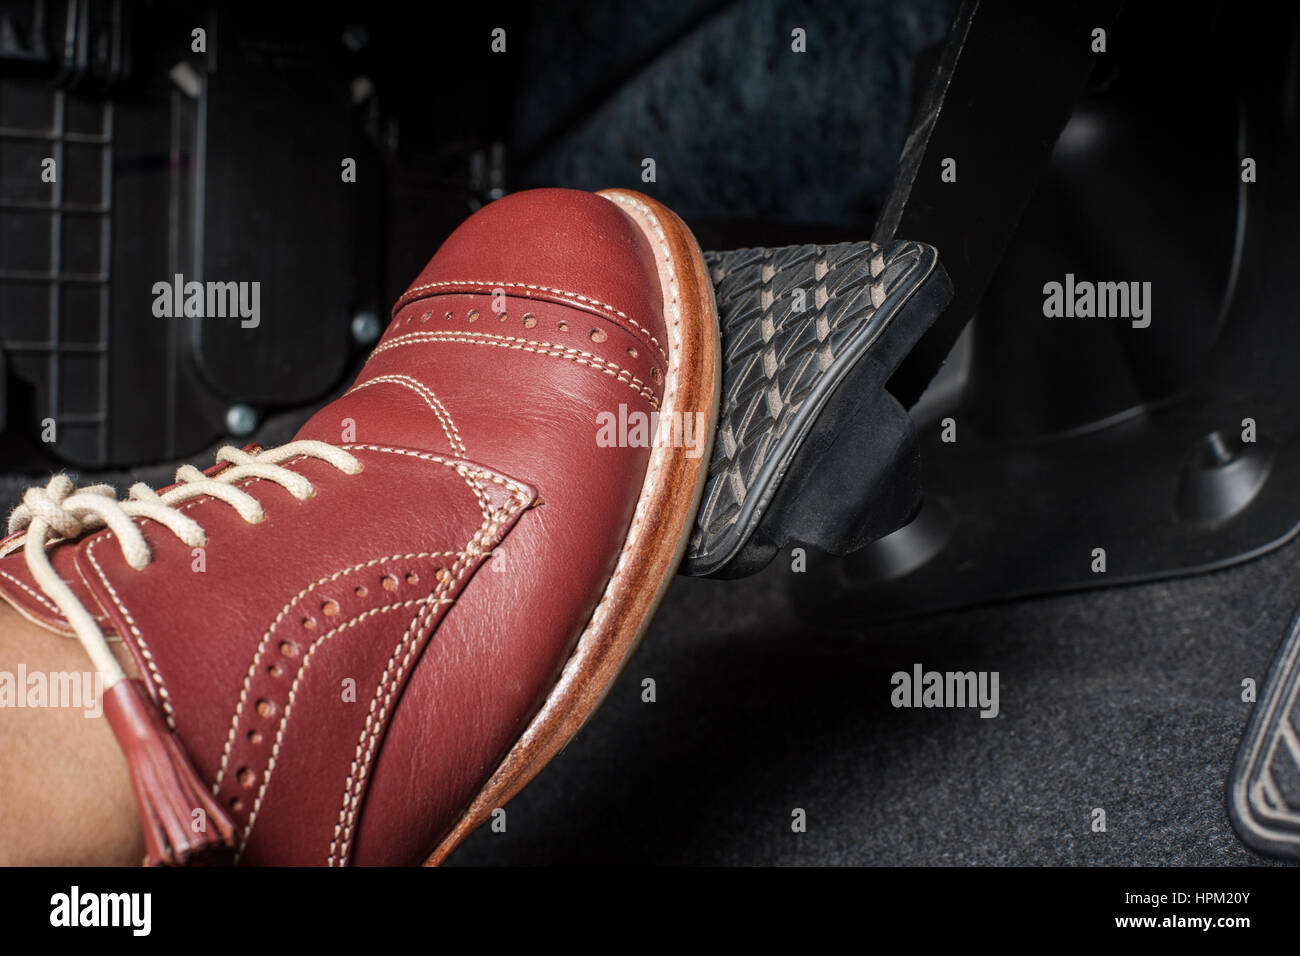 foot pressing the brake pedal of a car Stock Photo - Alamy